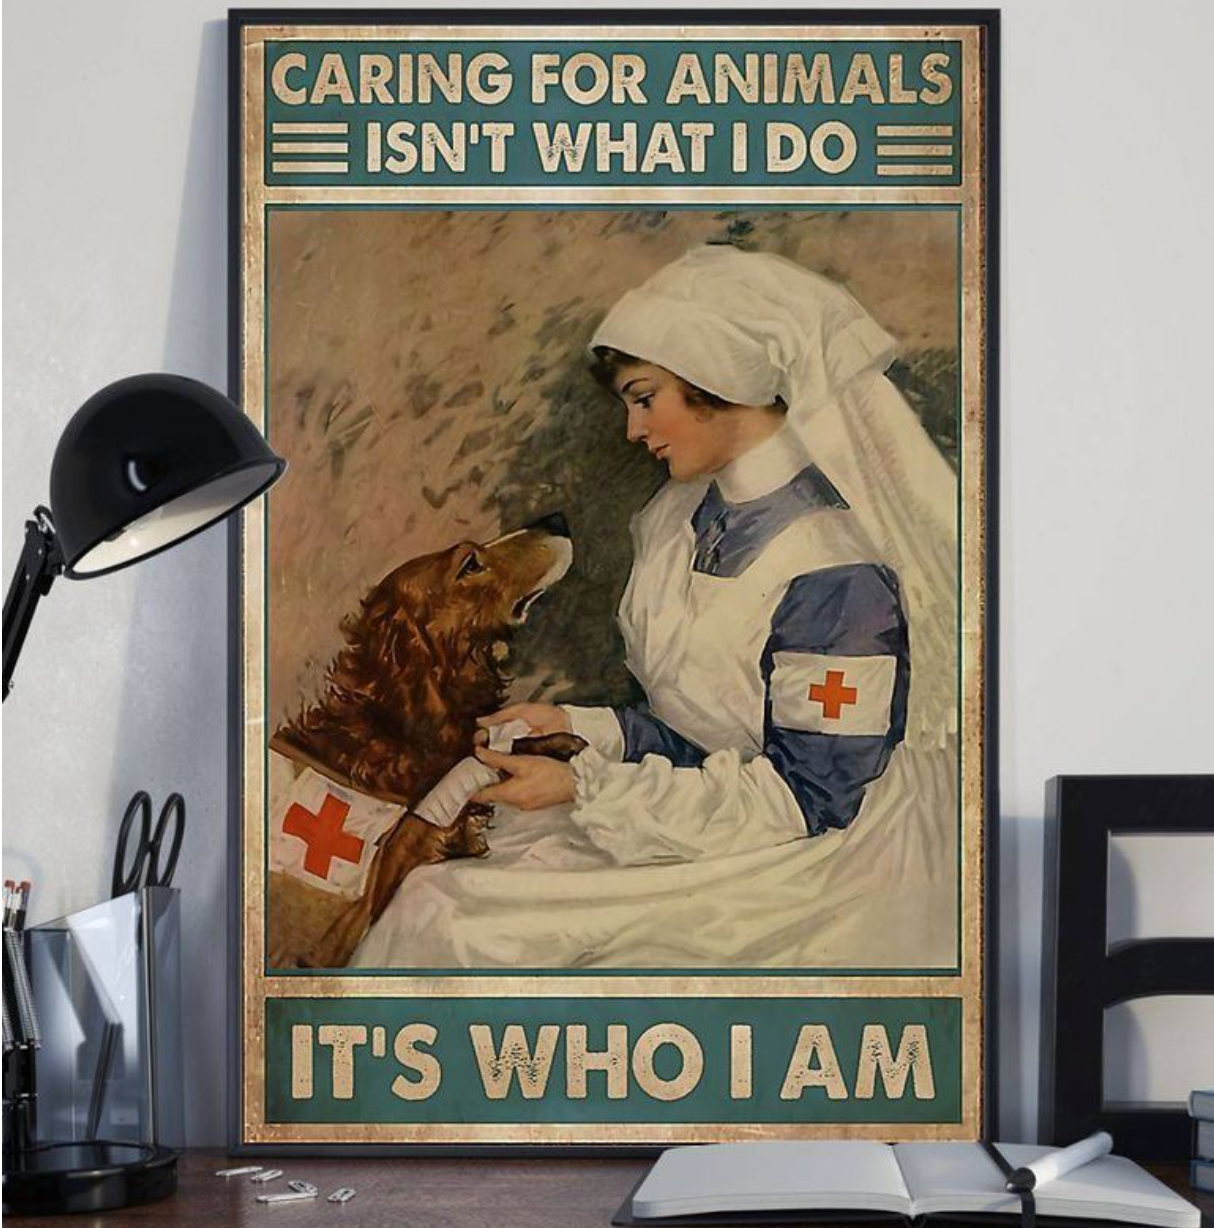 Nurse caring for animals isn't what i do it's who i am a dog